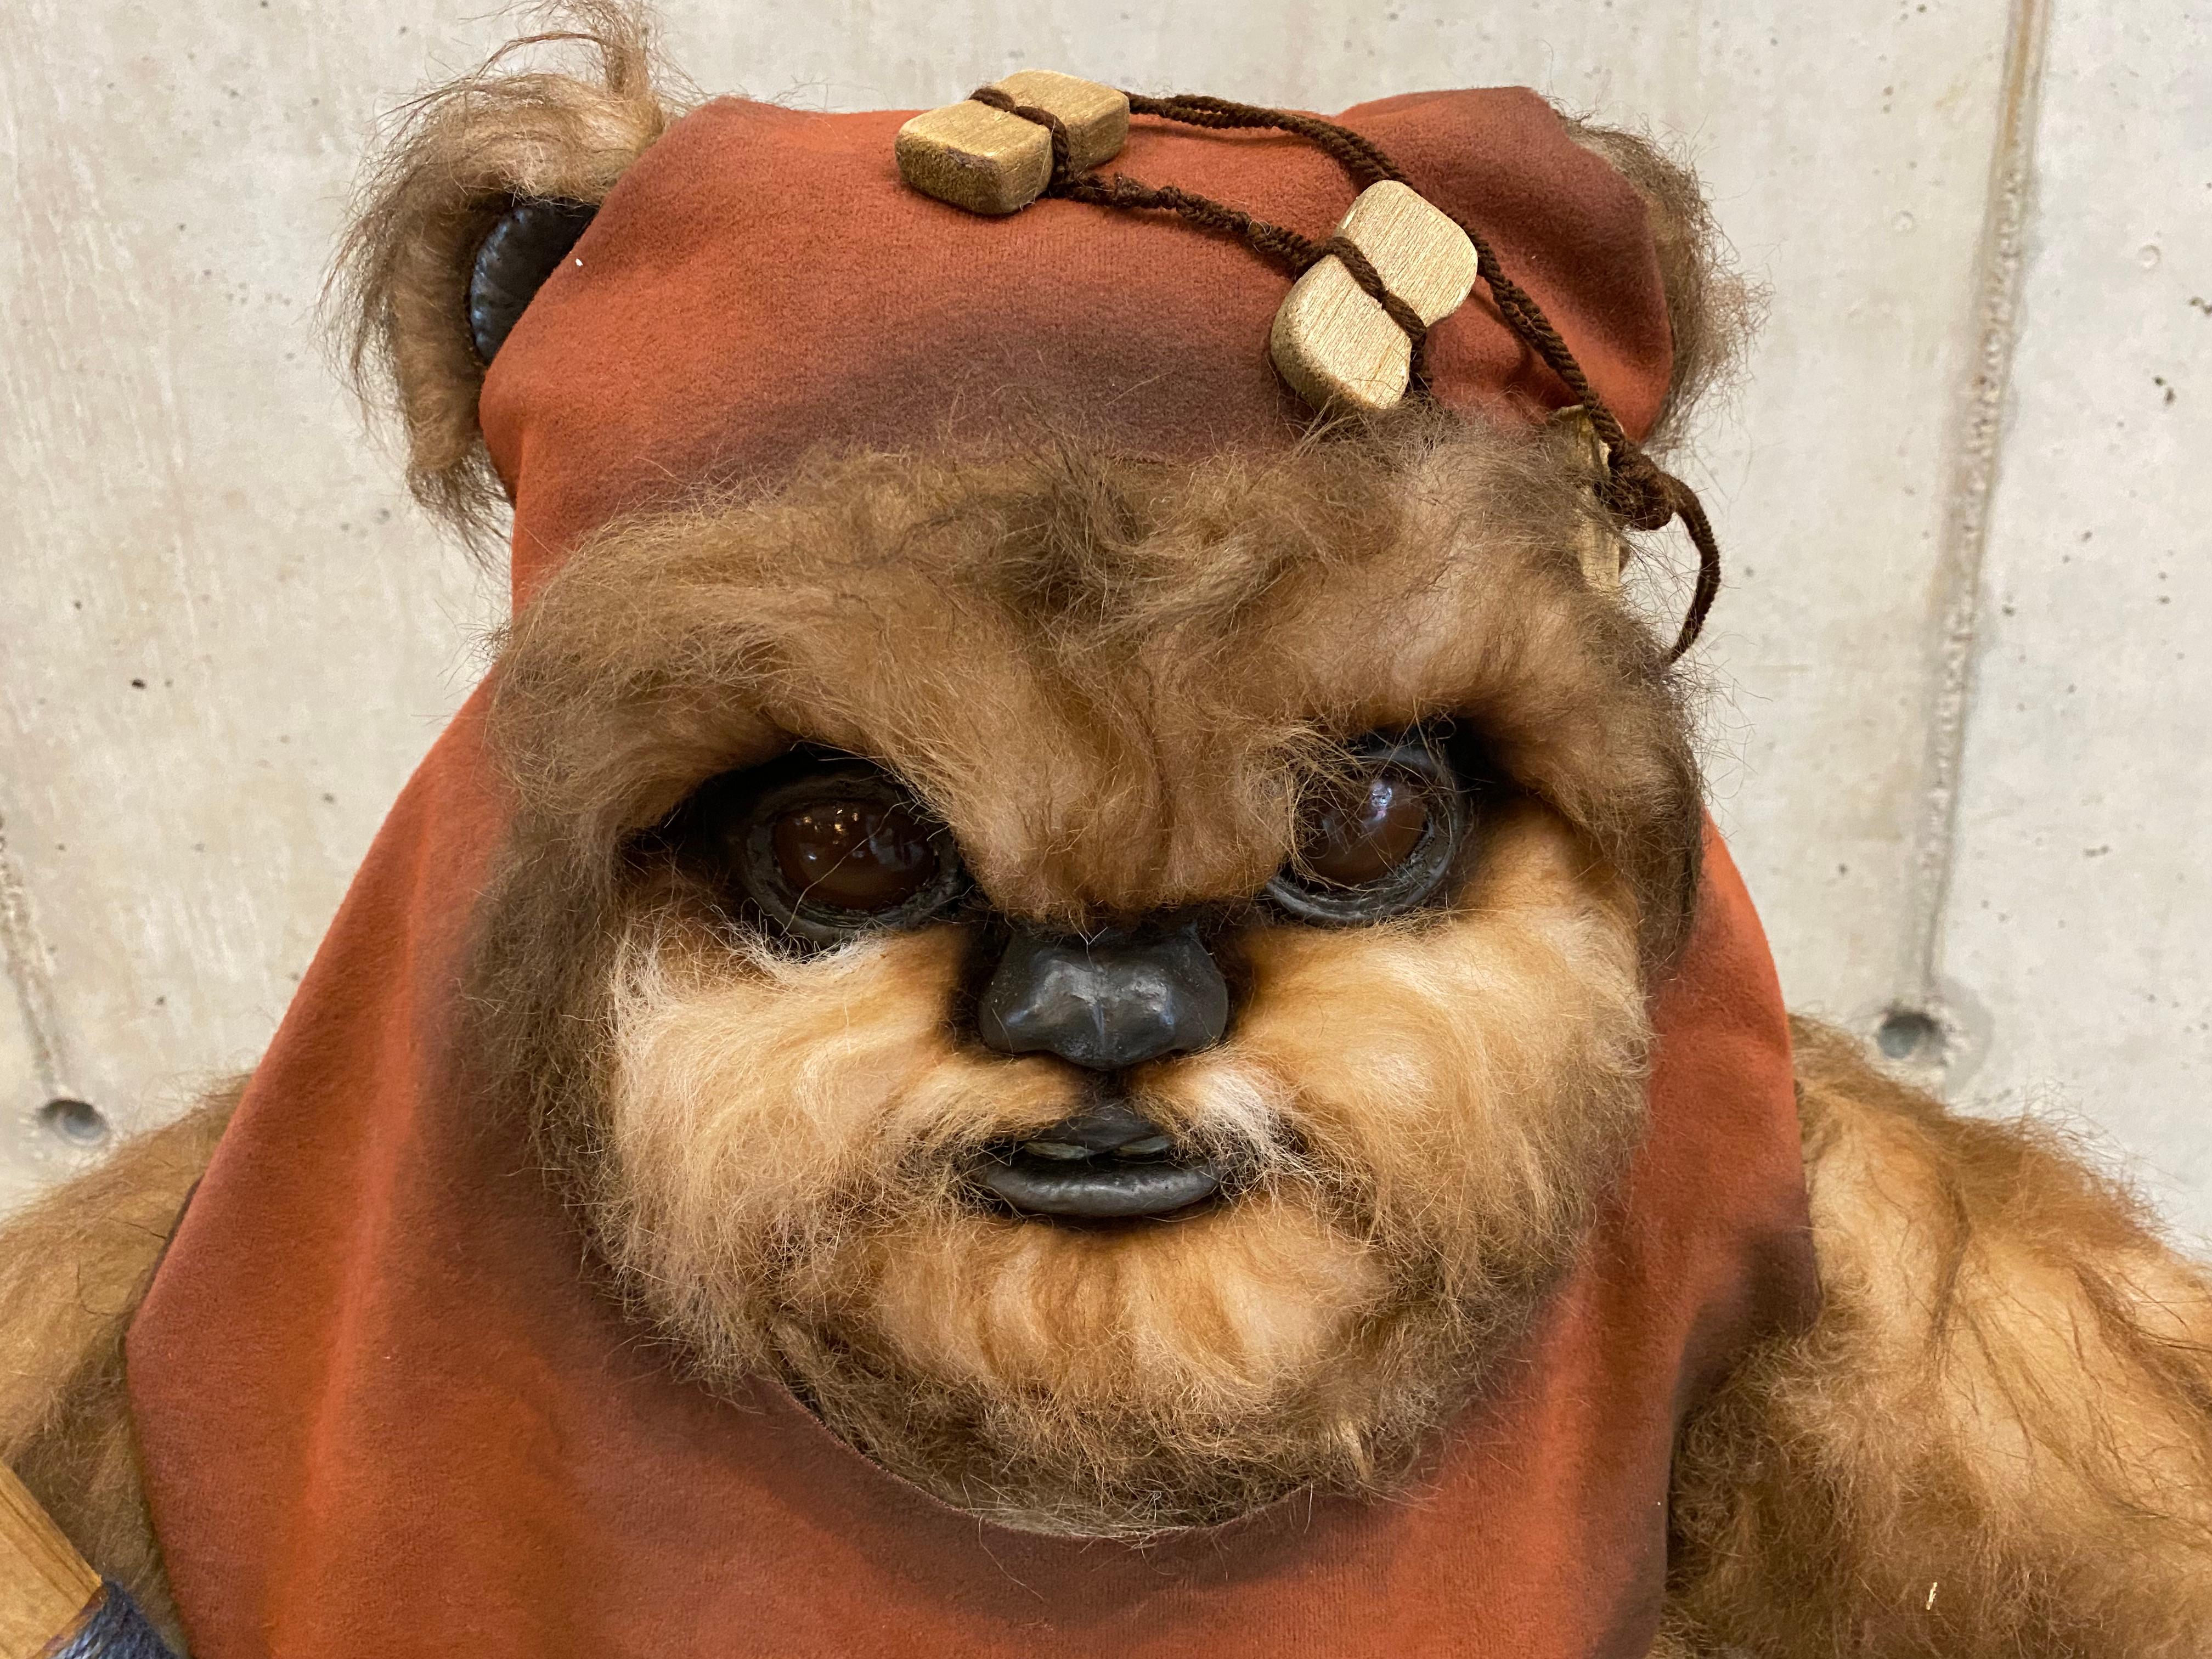 Life Size Wicket Ewok Figure, Edition of 50 Pieces, Star Wars Photo Requisite 7